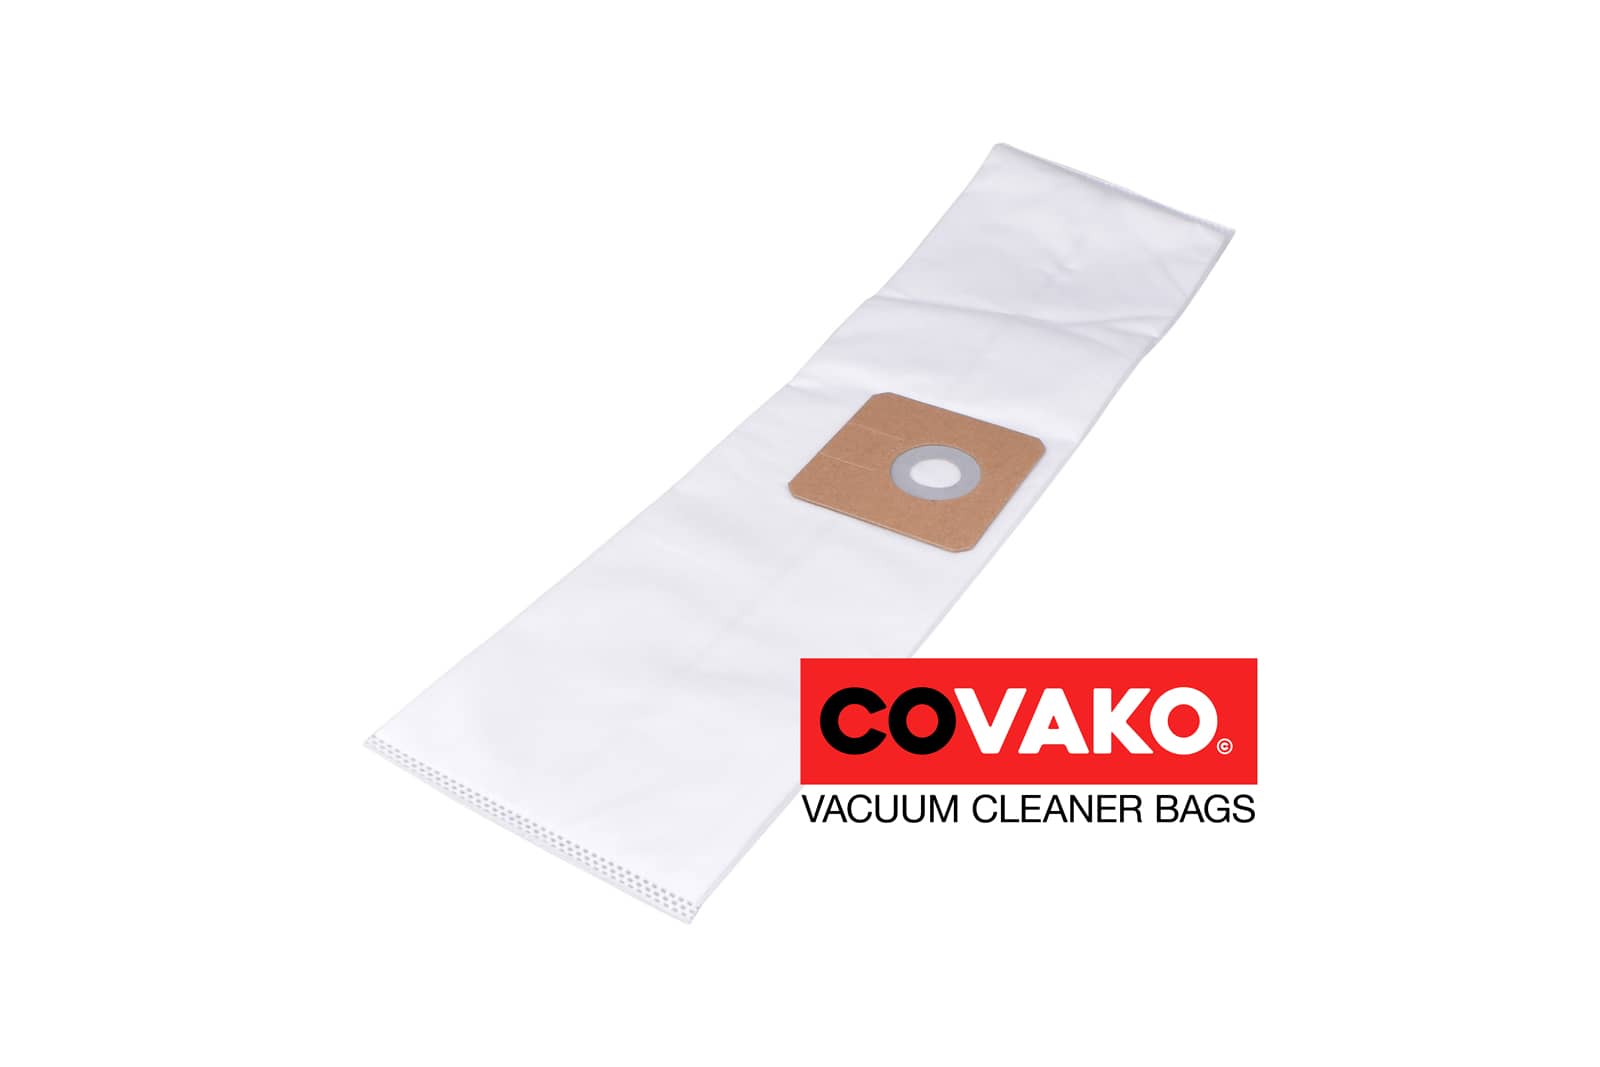 Ecolab Blue Vac 11 / Synthesis - Ecolab vacuum cleaner bags